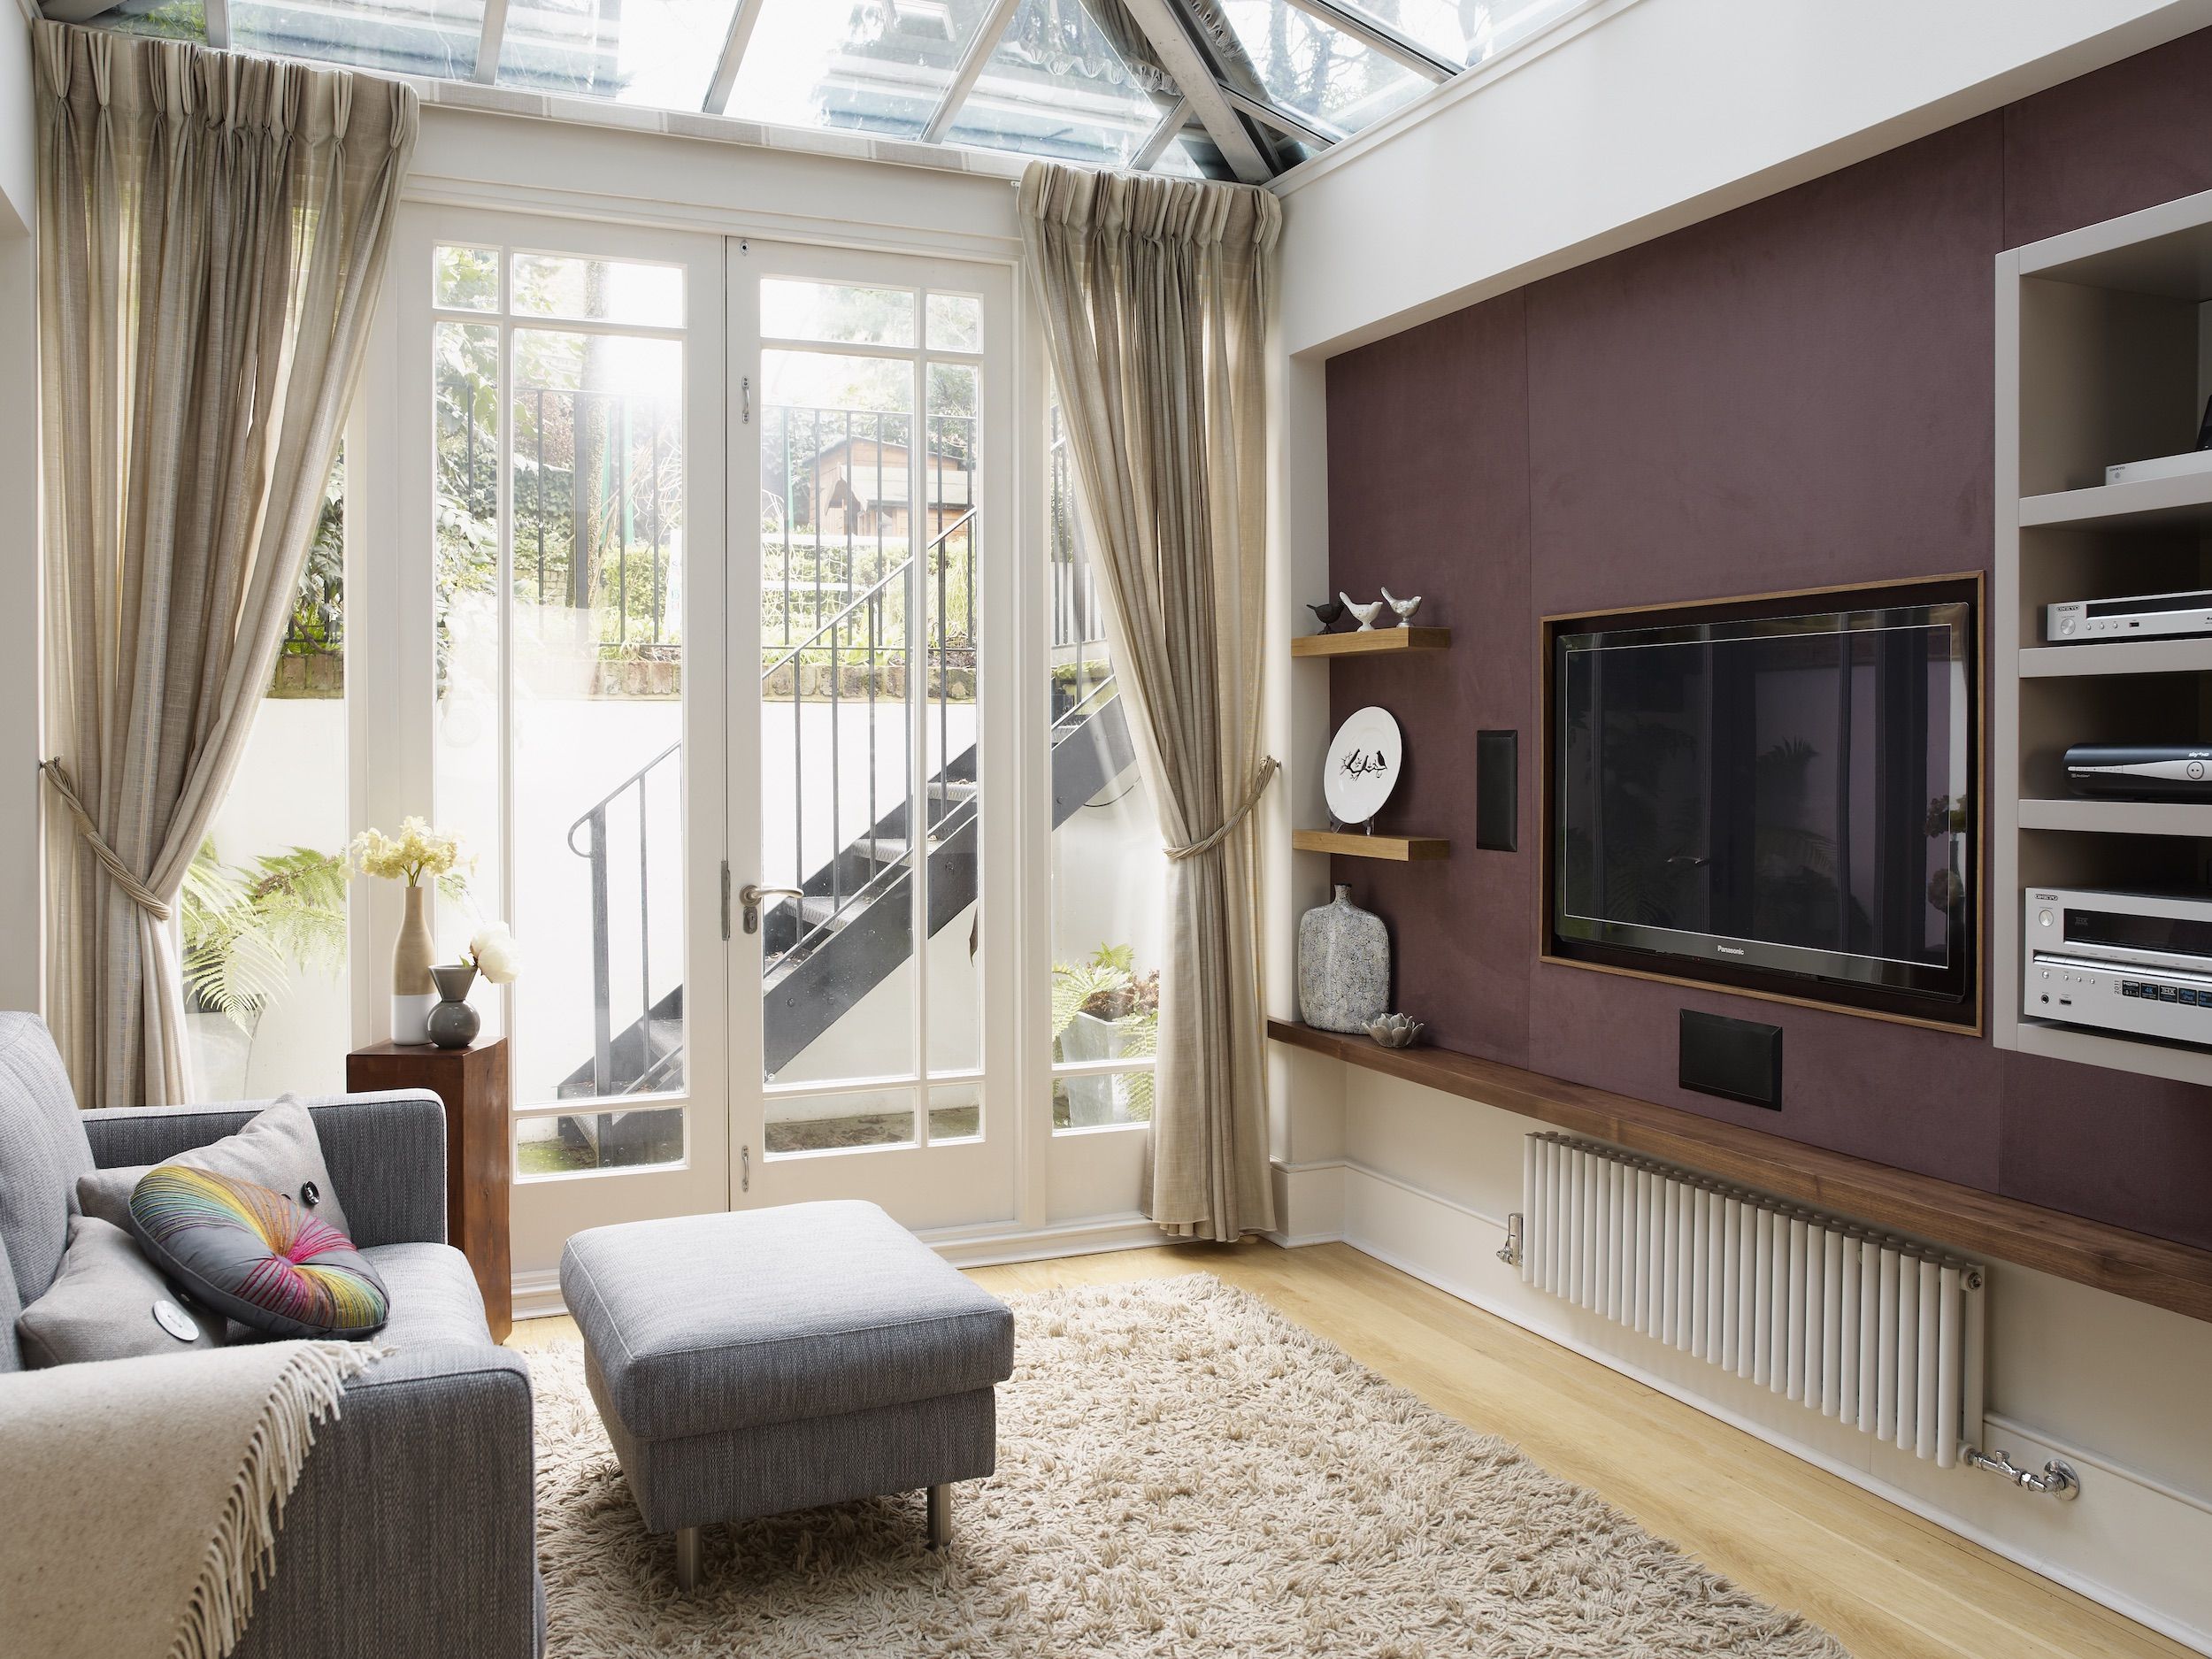 11 Tv Wall Ideas That'S Both Practical And Stylish